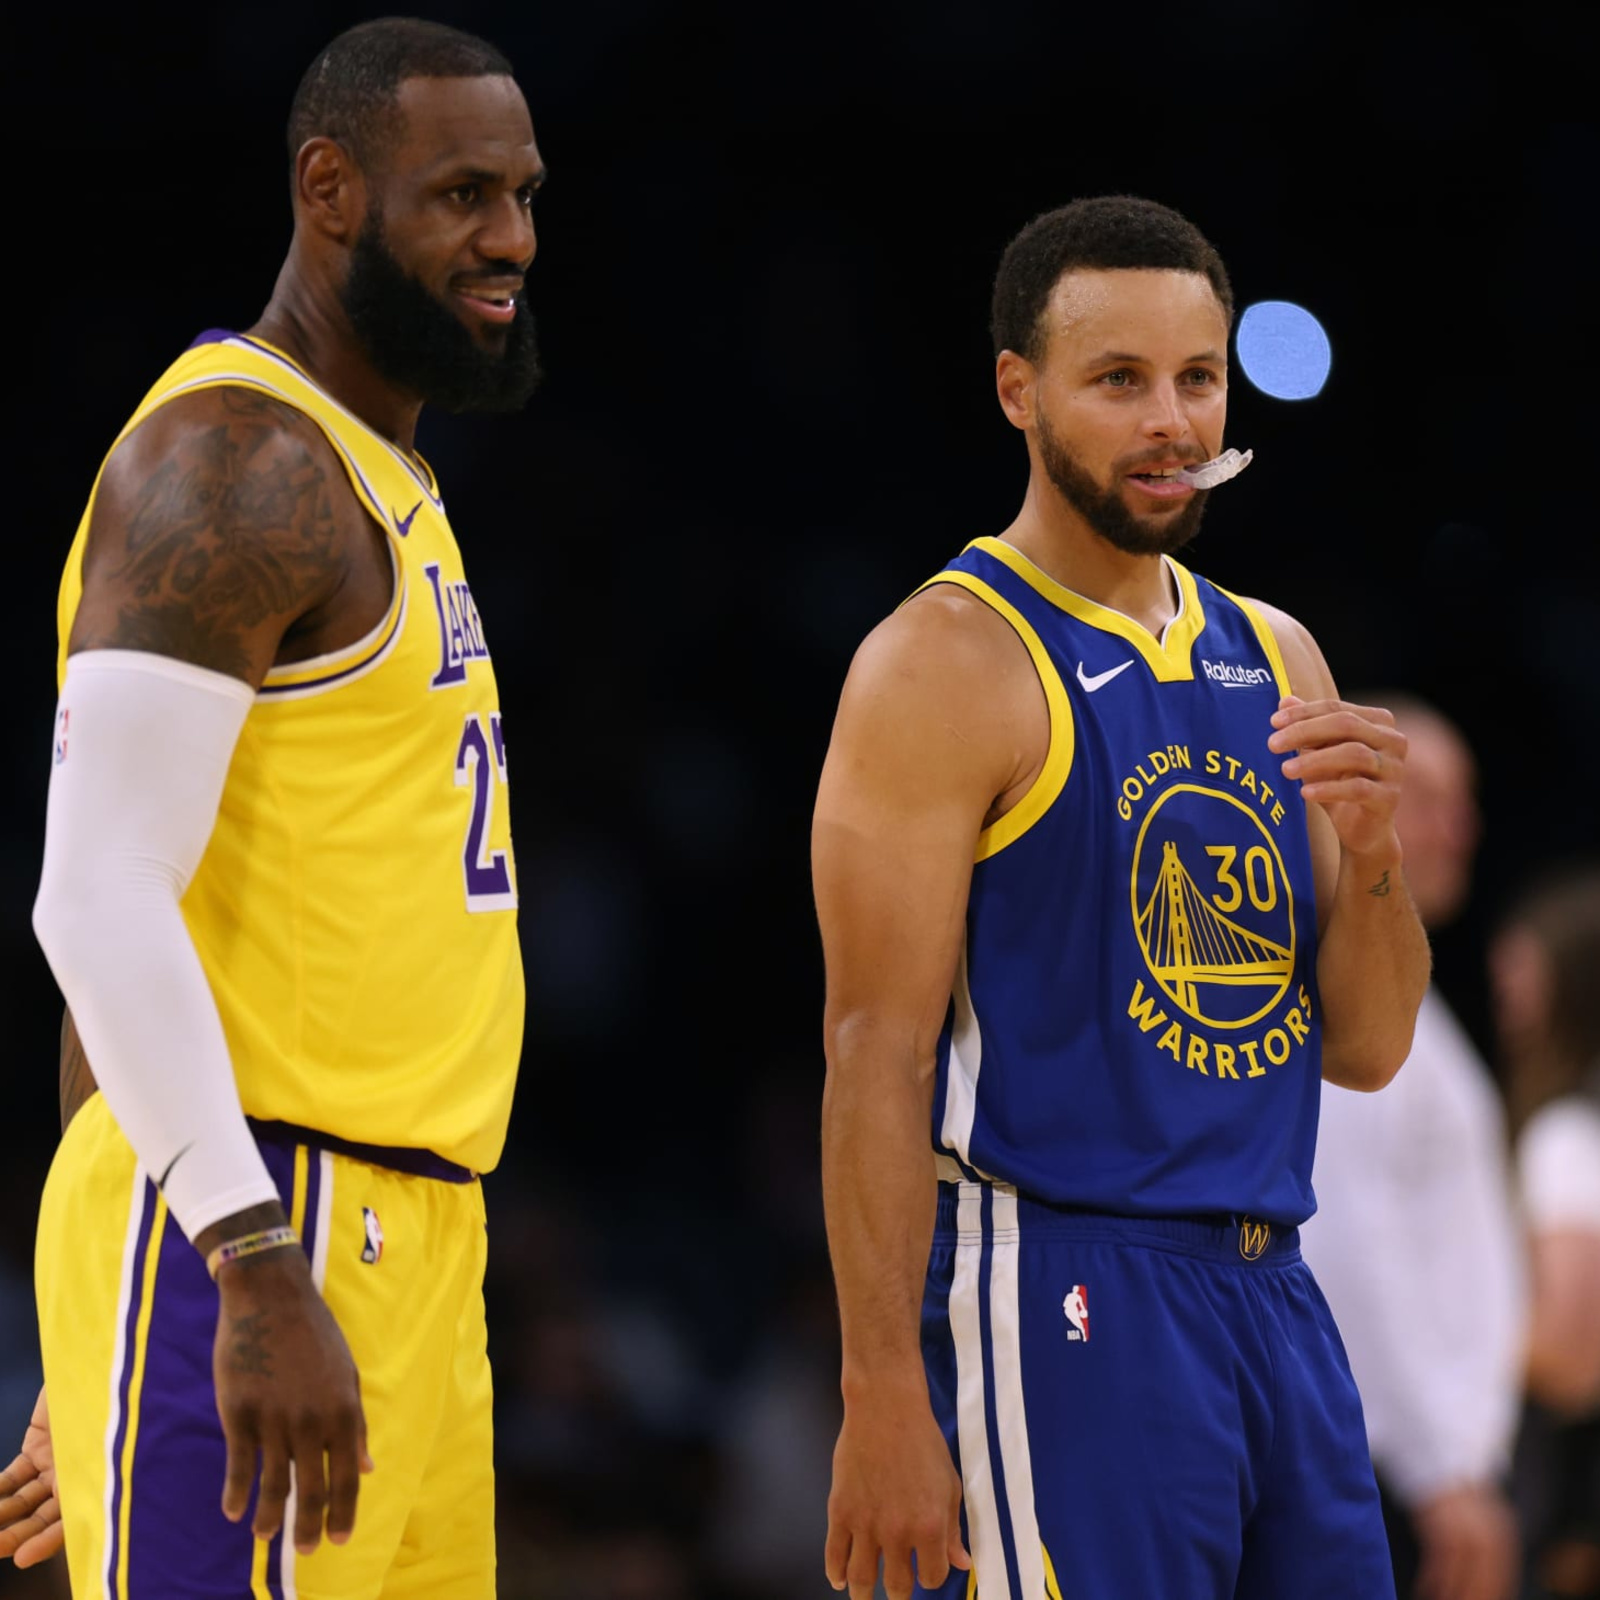 Reports: NBA salary cap projections for 2023-24 season higher than